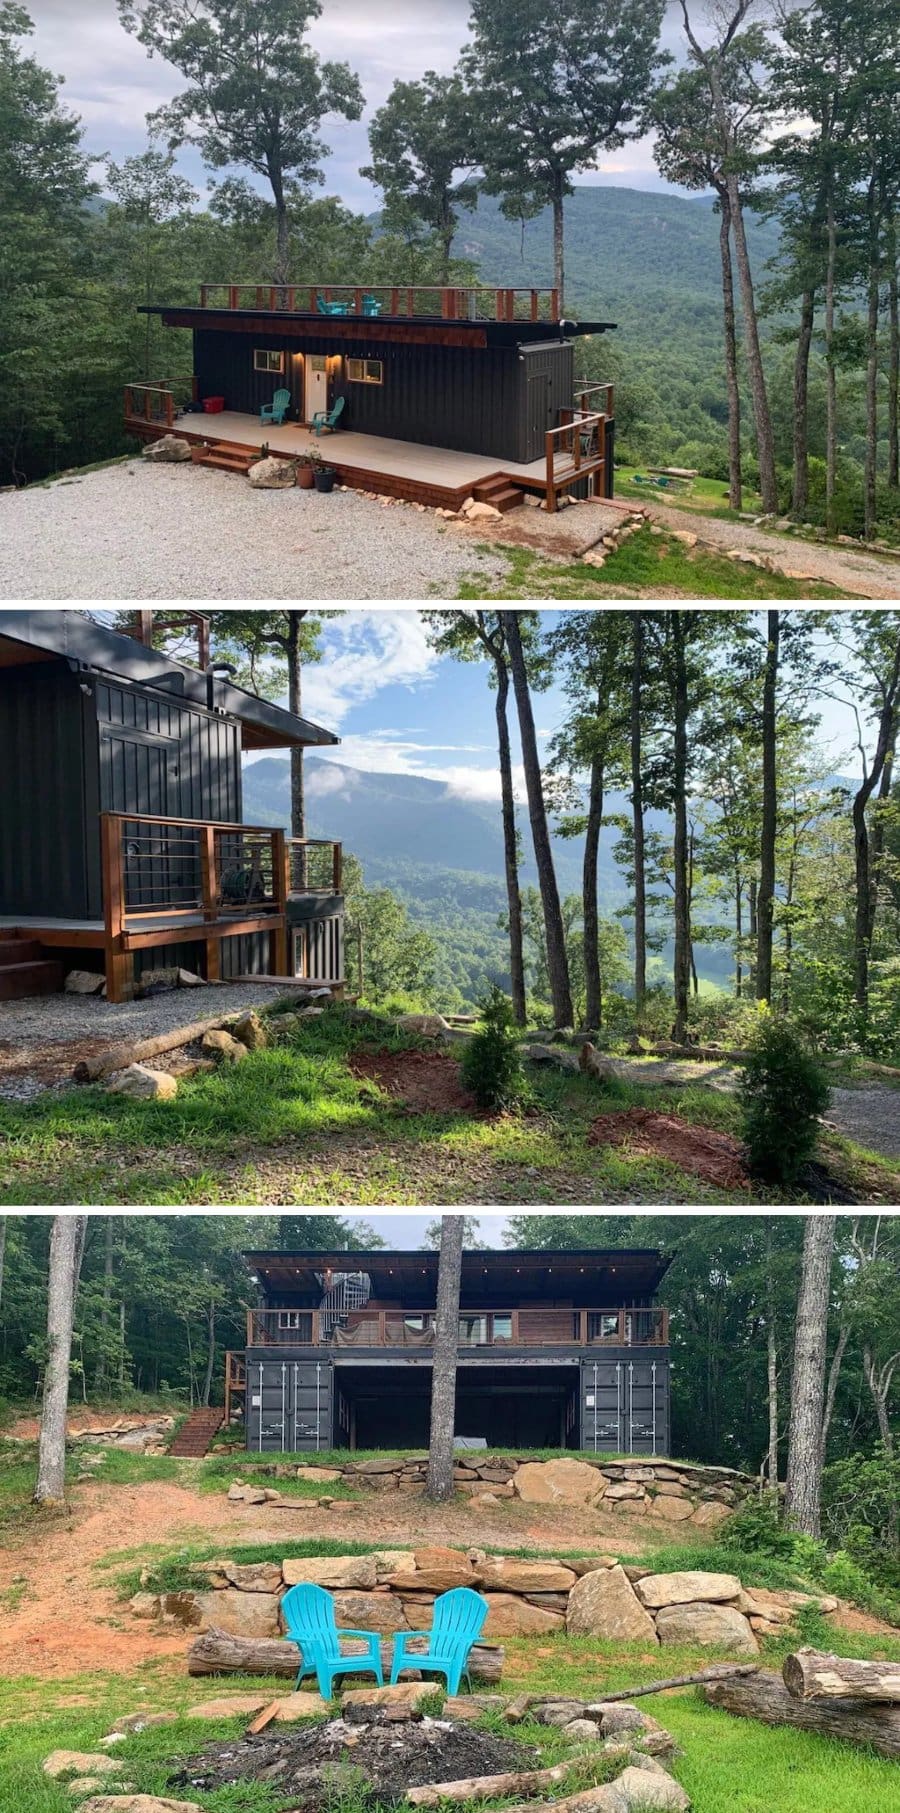 Interior and exterior images of the Appalachian Cabin in North Carolina that overlooks the mountains